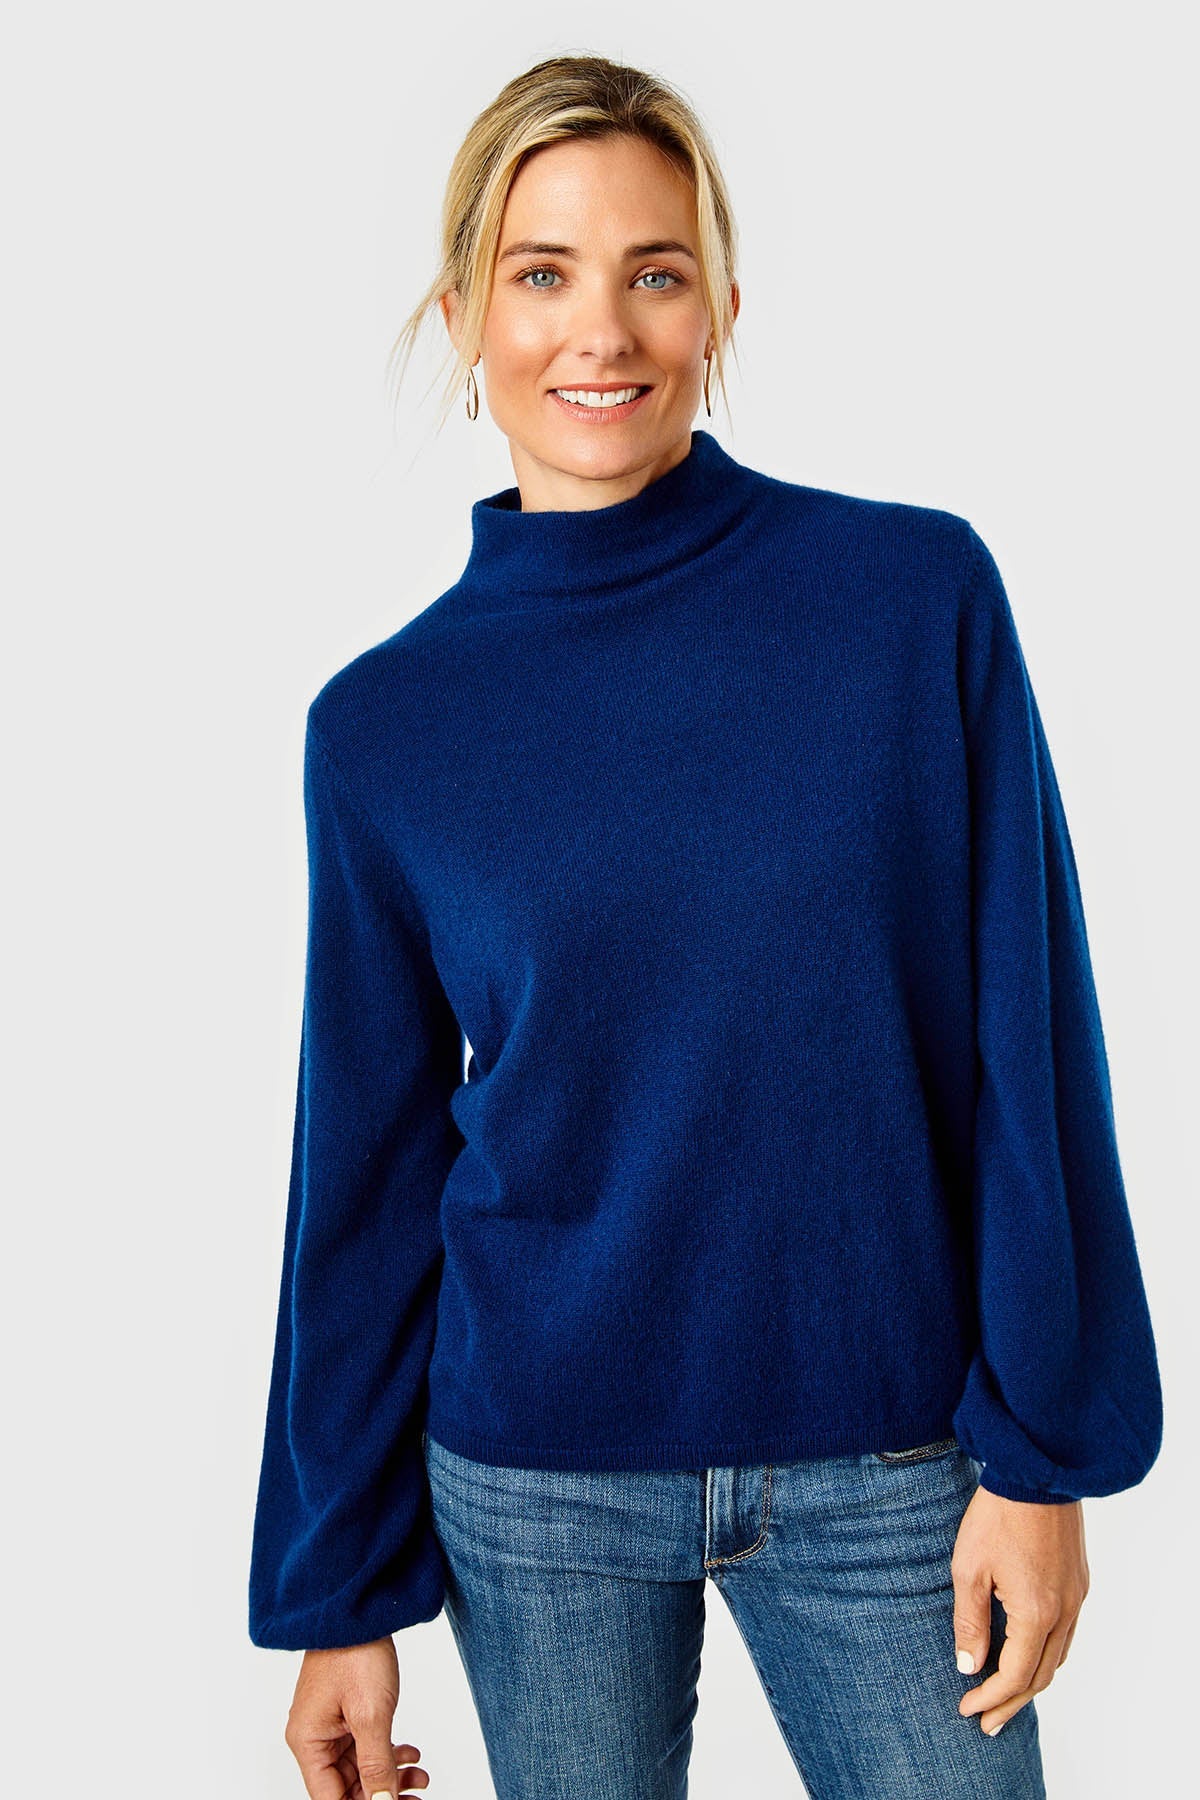 Willow Sweater-Cashmere-Navy by Cartolina